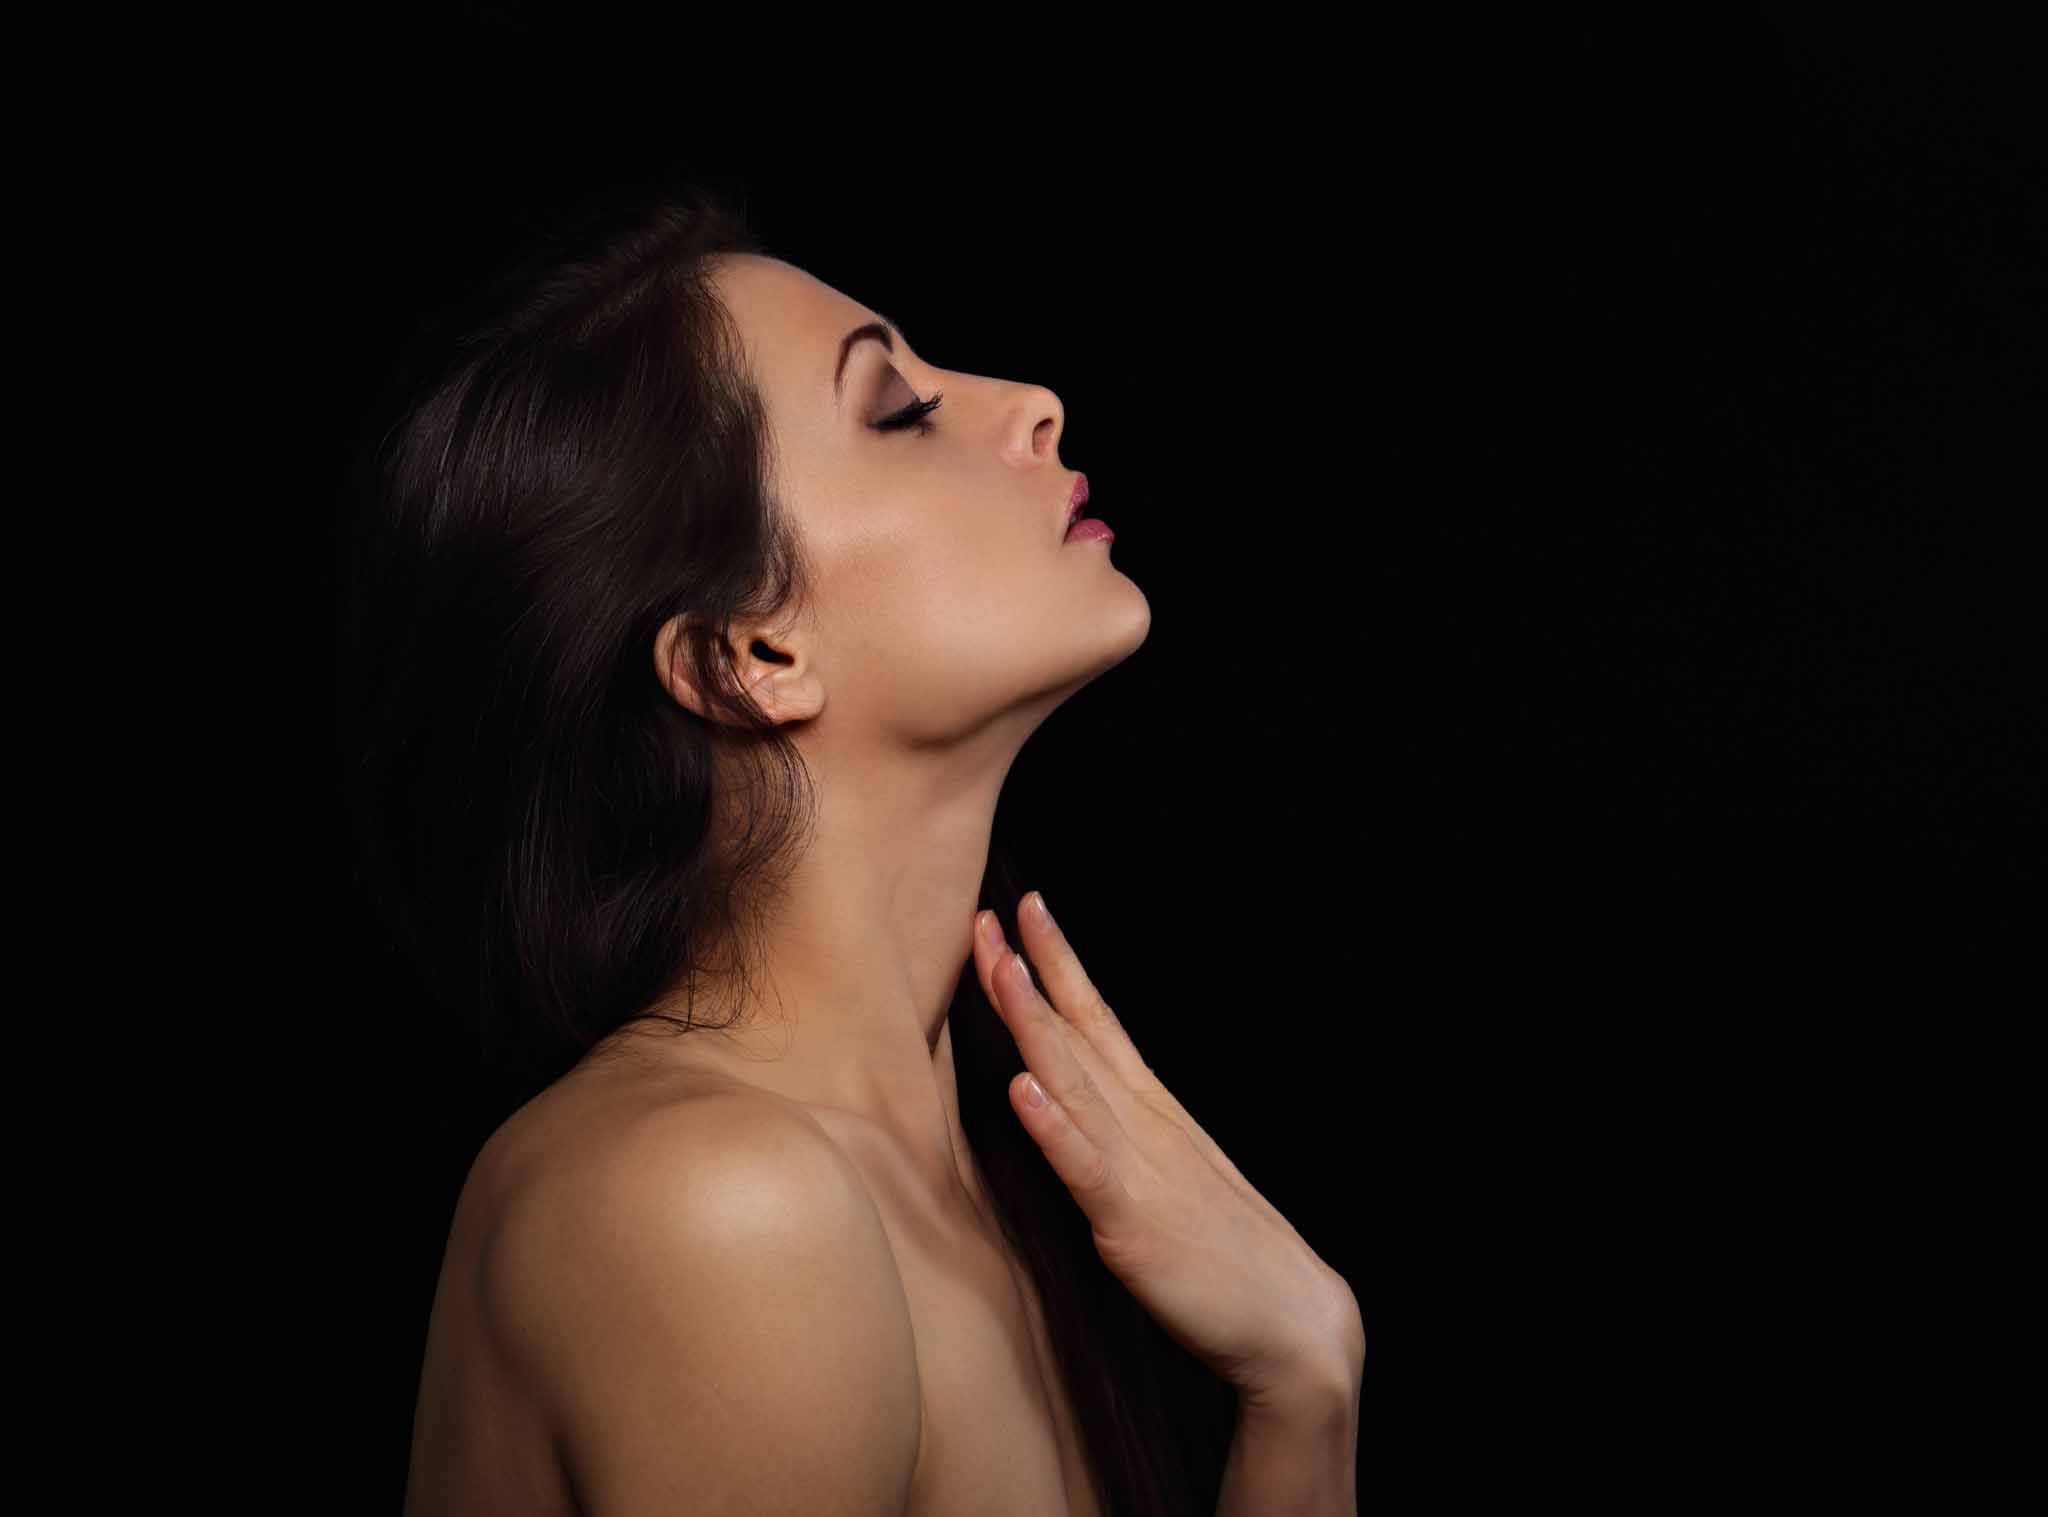 Beautiful makeup sexy woman touching the fingers elegant healthy neck skin wirh nude back and shoulder on black background with empty copy space. Closeup profile view portrait. Art.Expression.